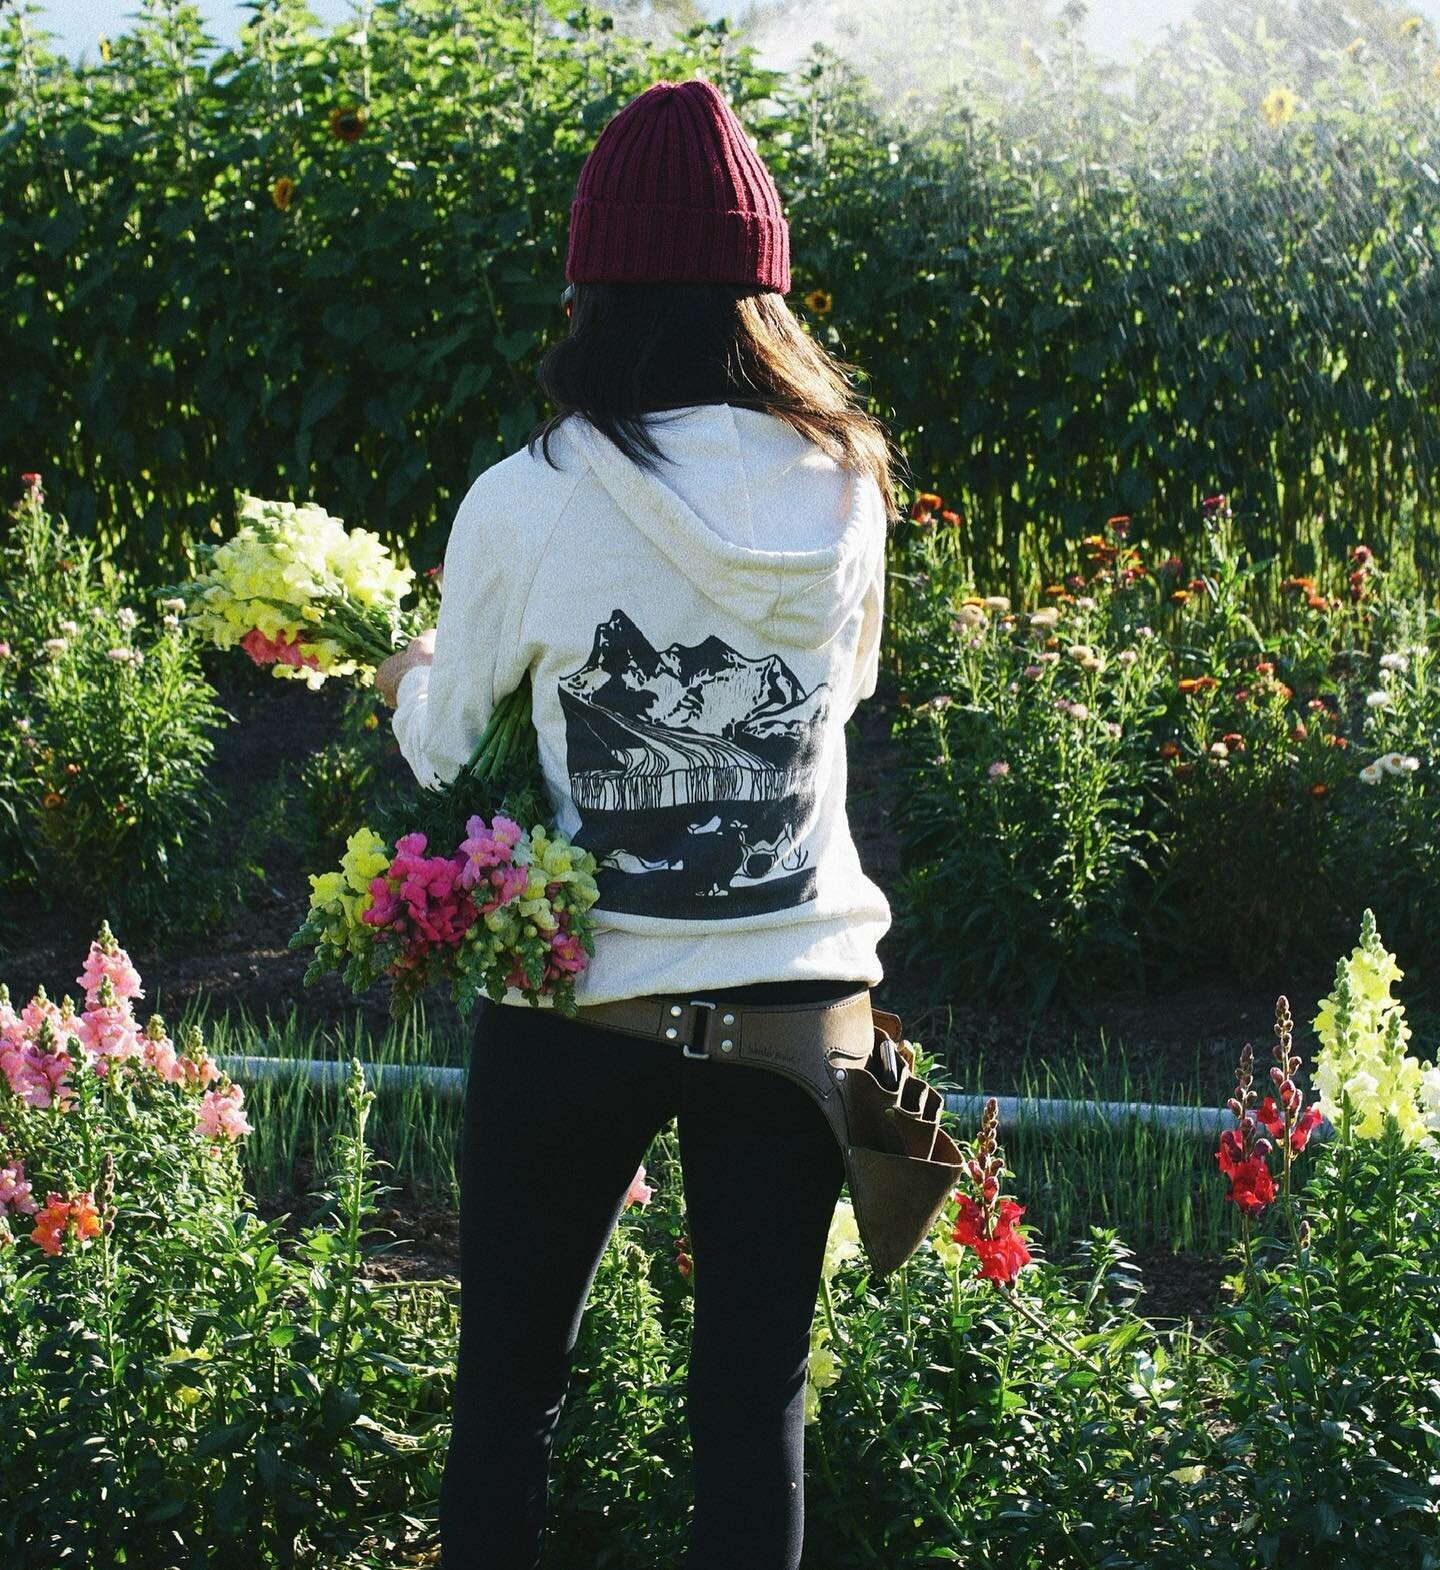 Represent in organic comfort while supporting local artists!
.
We commissioned local Alaskan artist @mtn.womanstudio to create the print for these limited run hoodies. Be sure to check out her other work!
.
Organic Cotton, made in the USA.
.
A portio